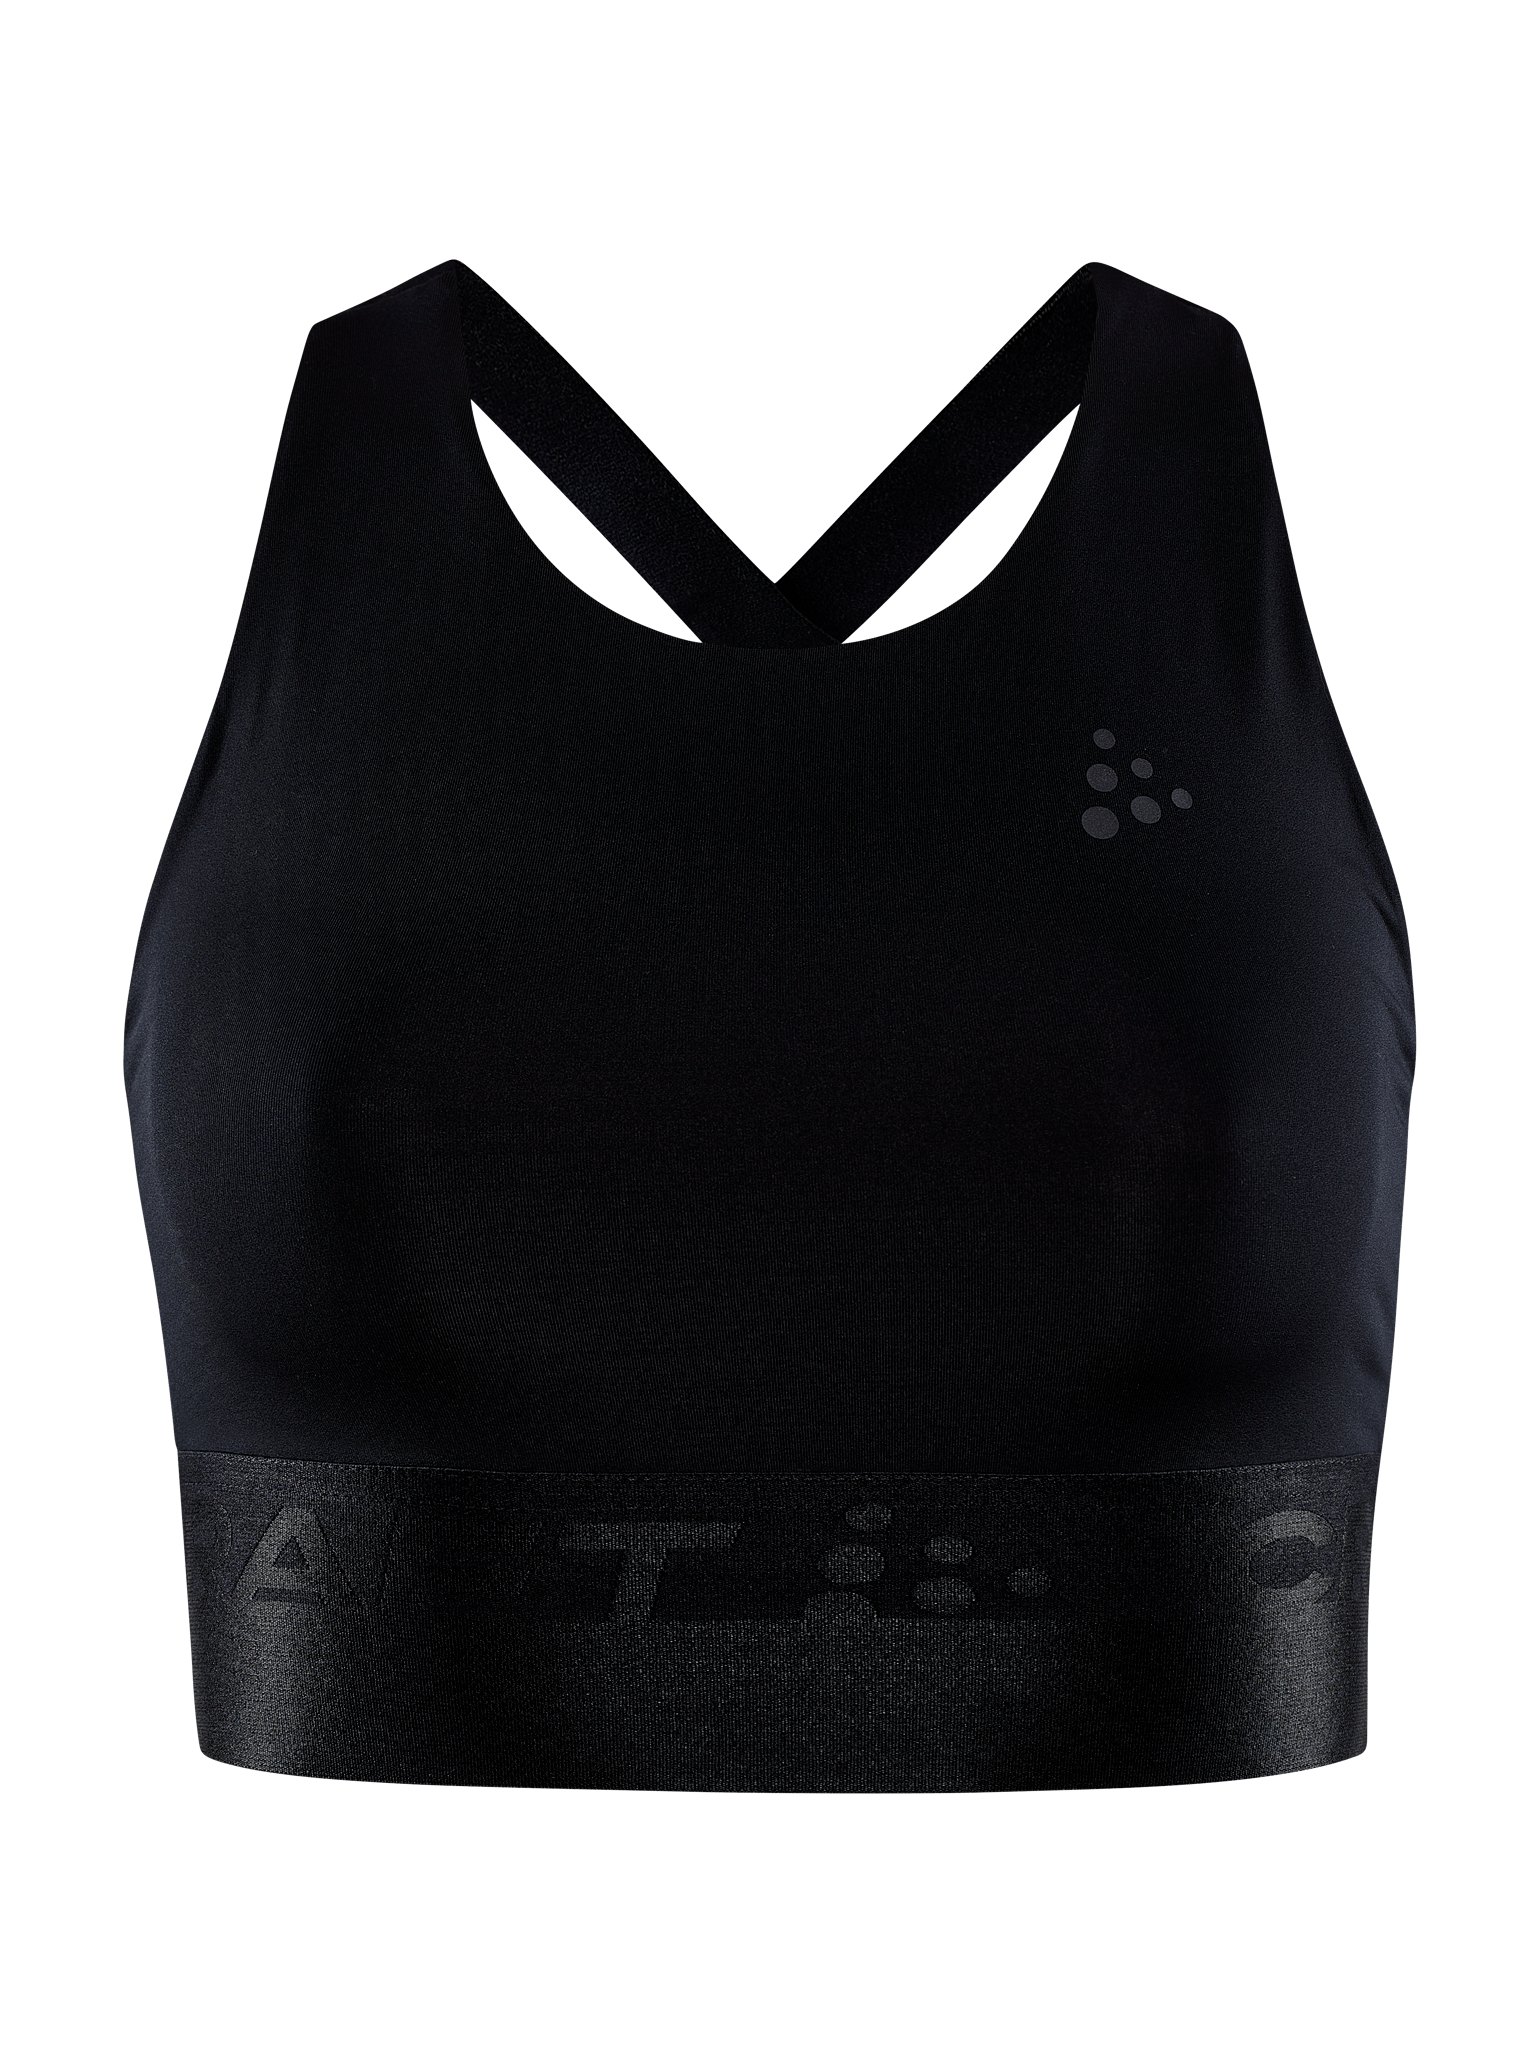 Women's Core Charge Sport Top Black